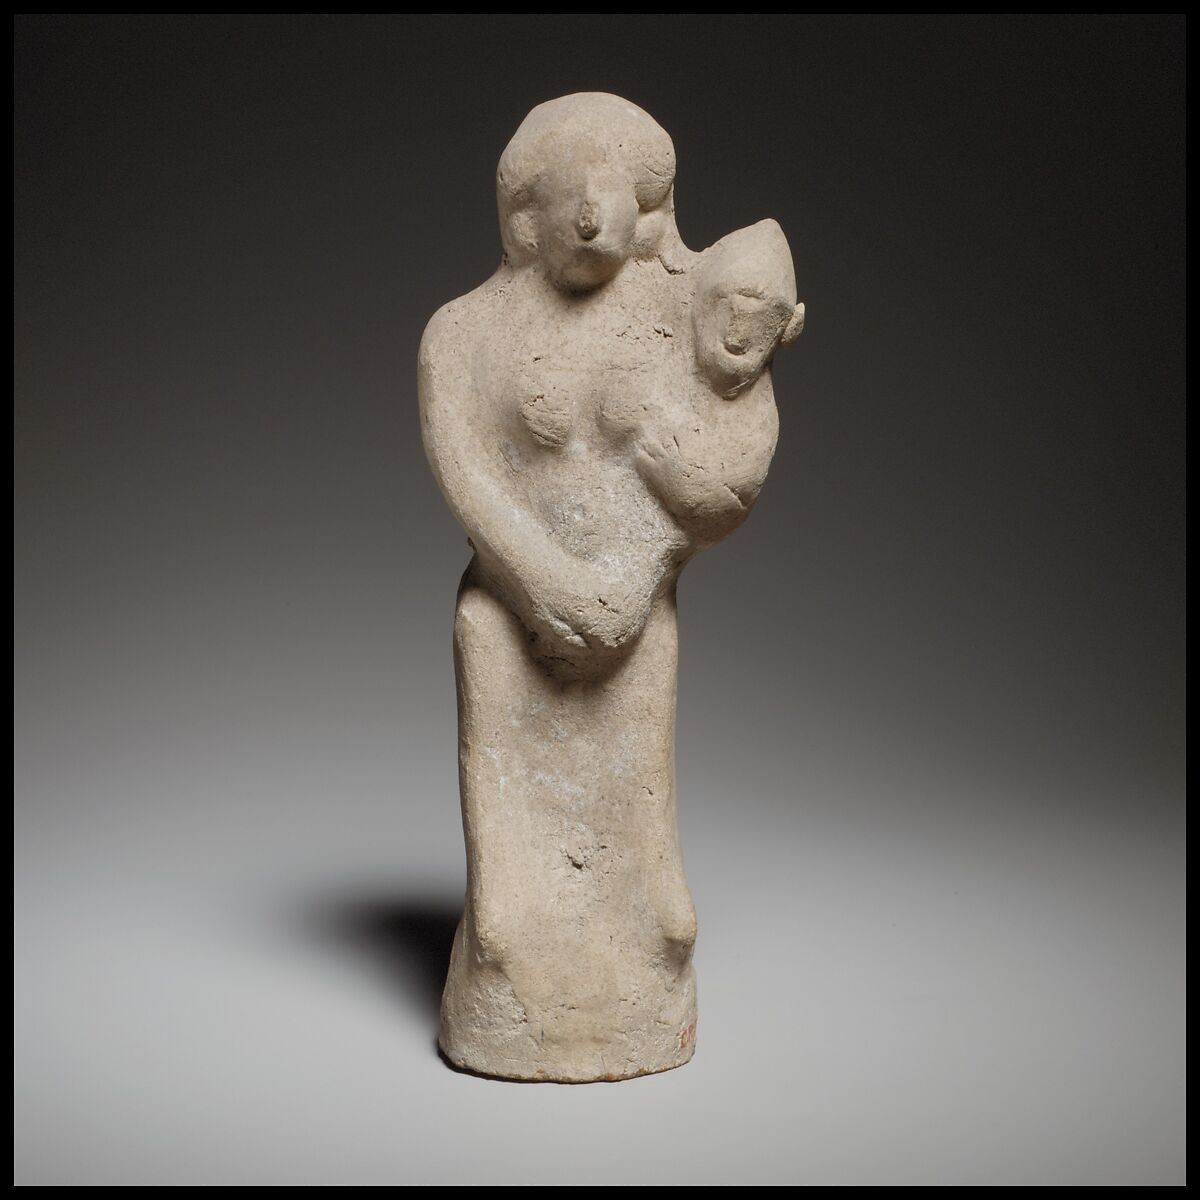 Seated female figurine holding a baby, Terracotta, Cypriot 